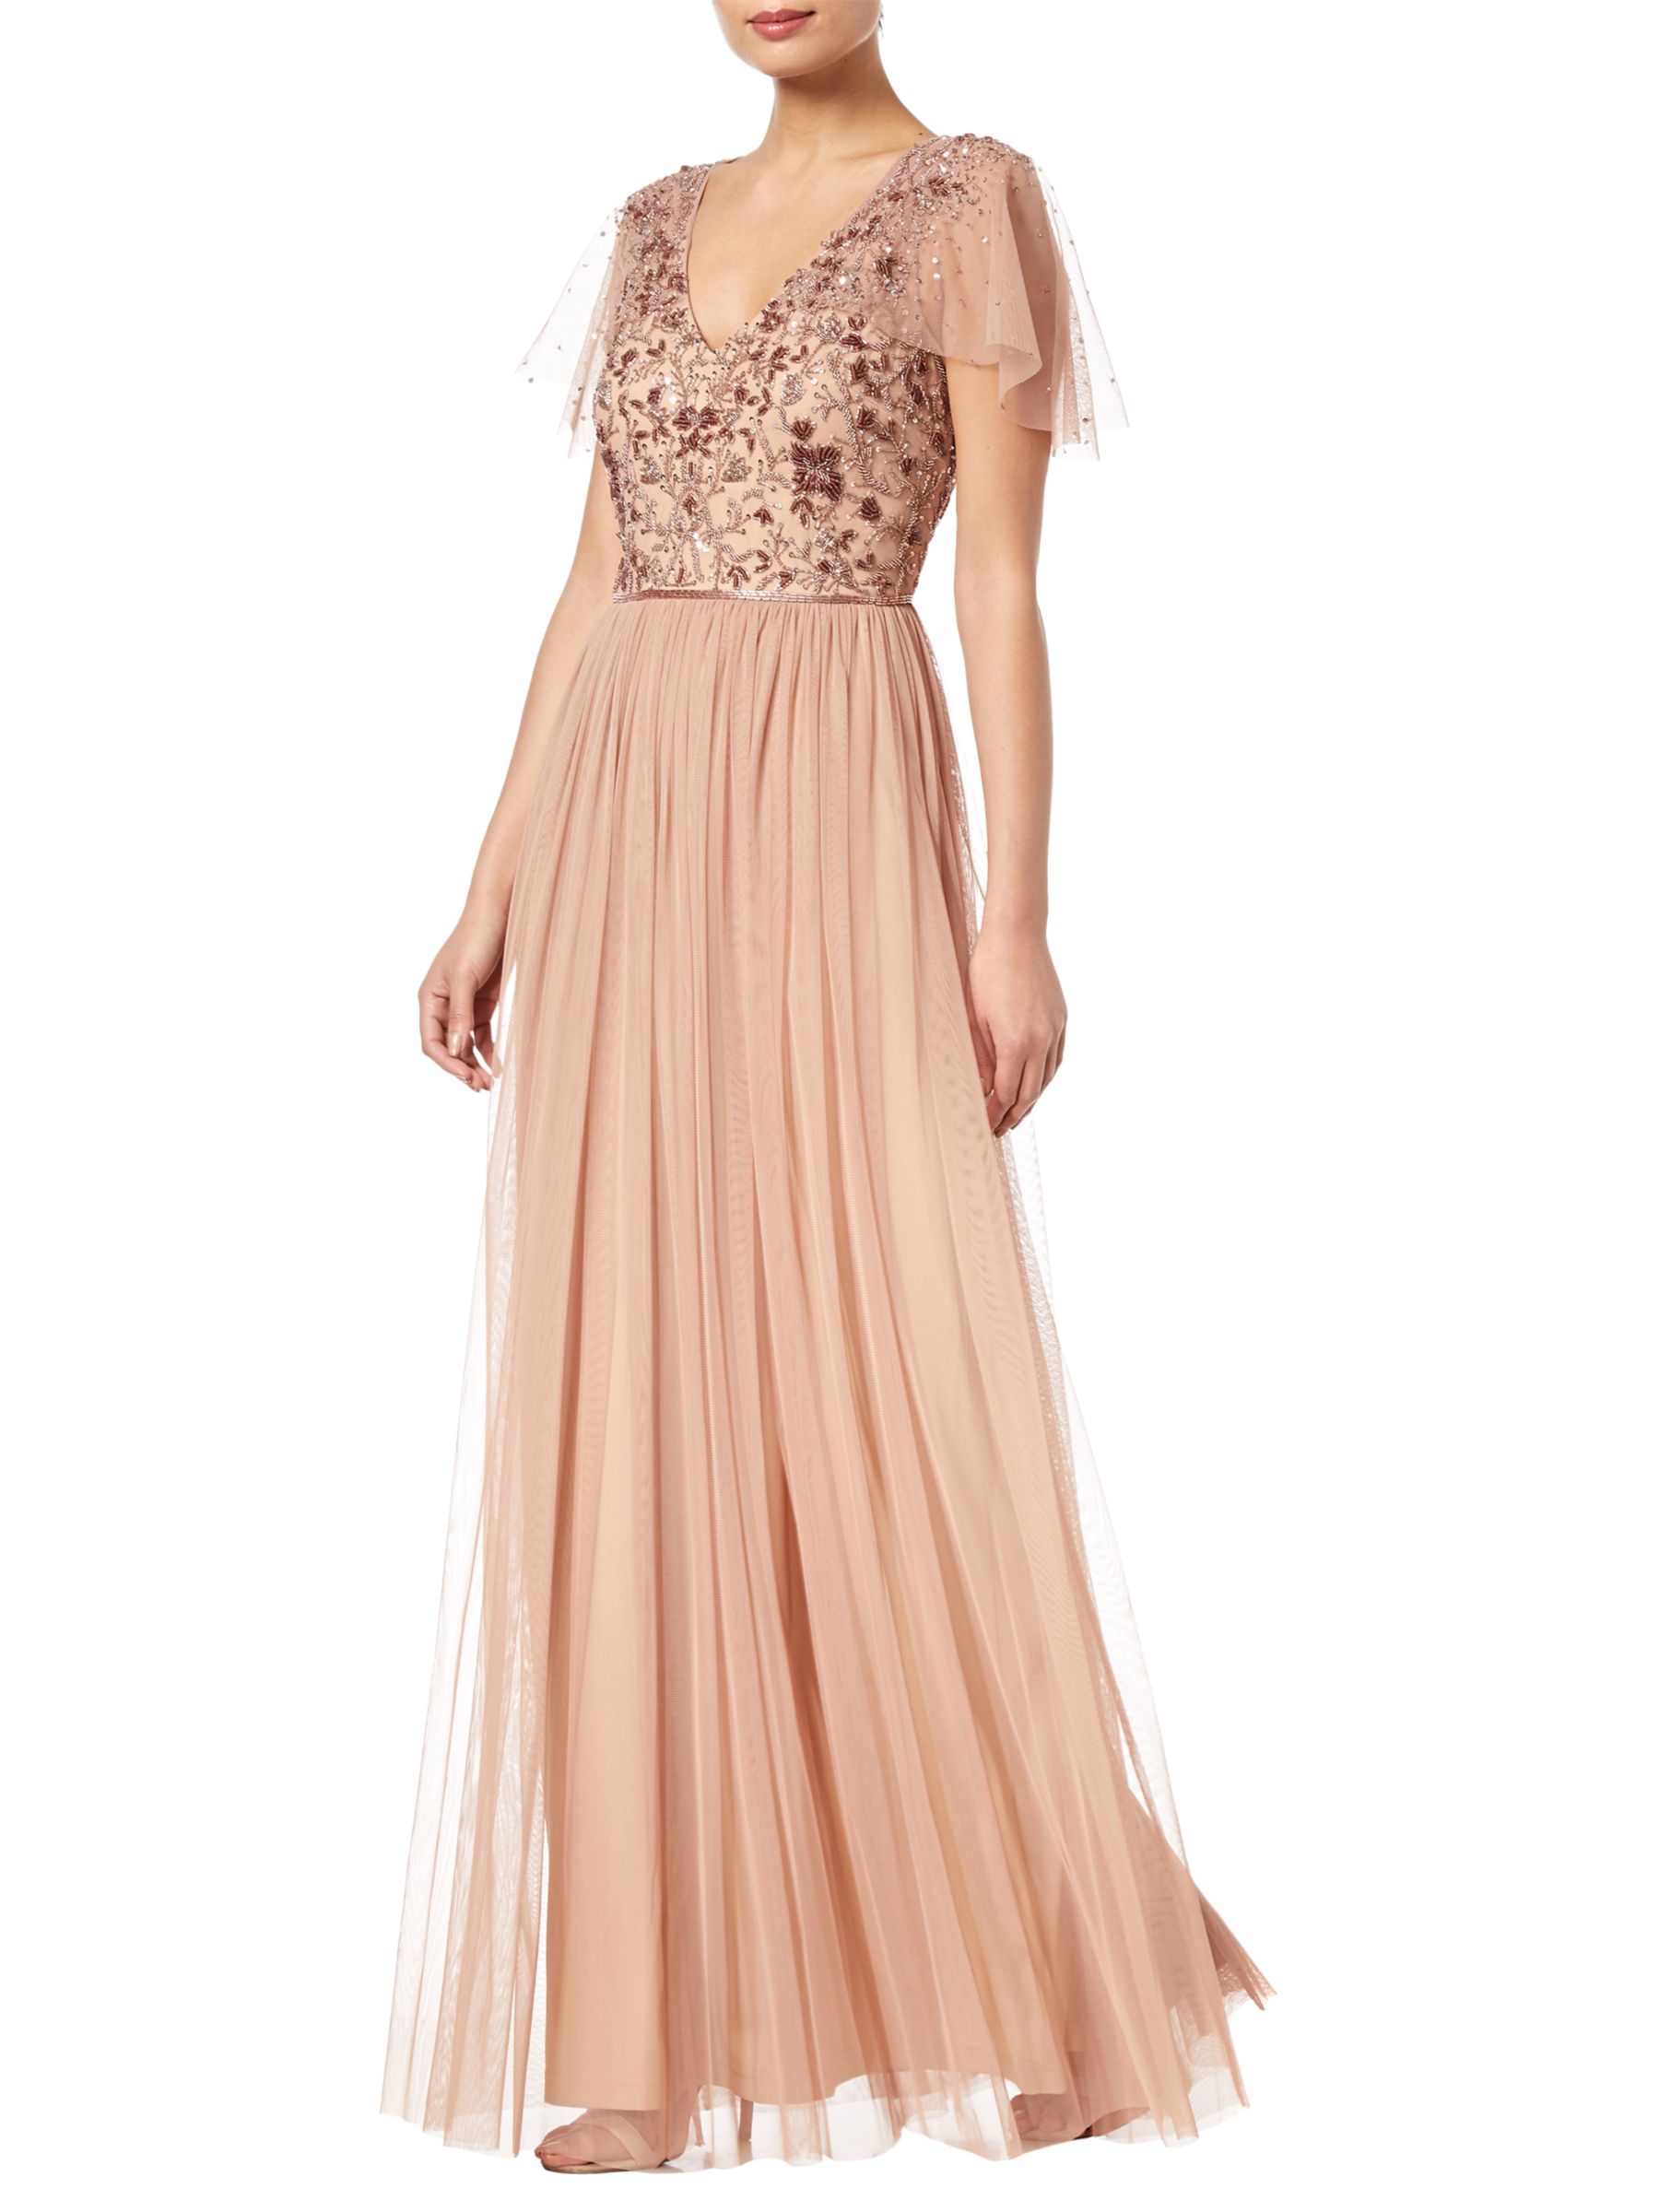 Adrianna Papell Long Beaded Dress, Rose Gold at John Lewis & Partners